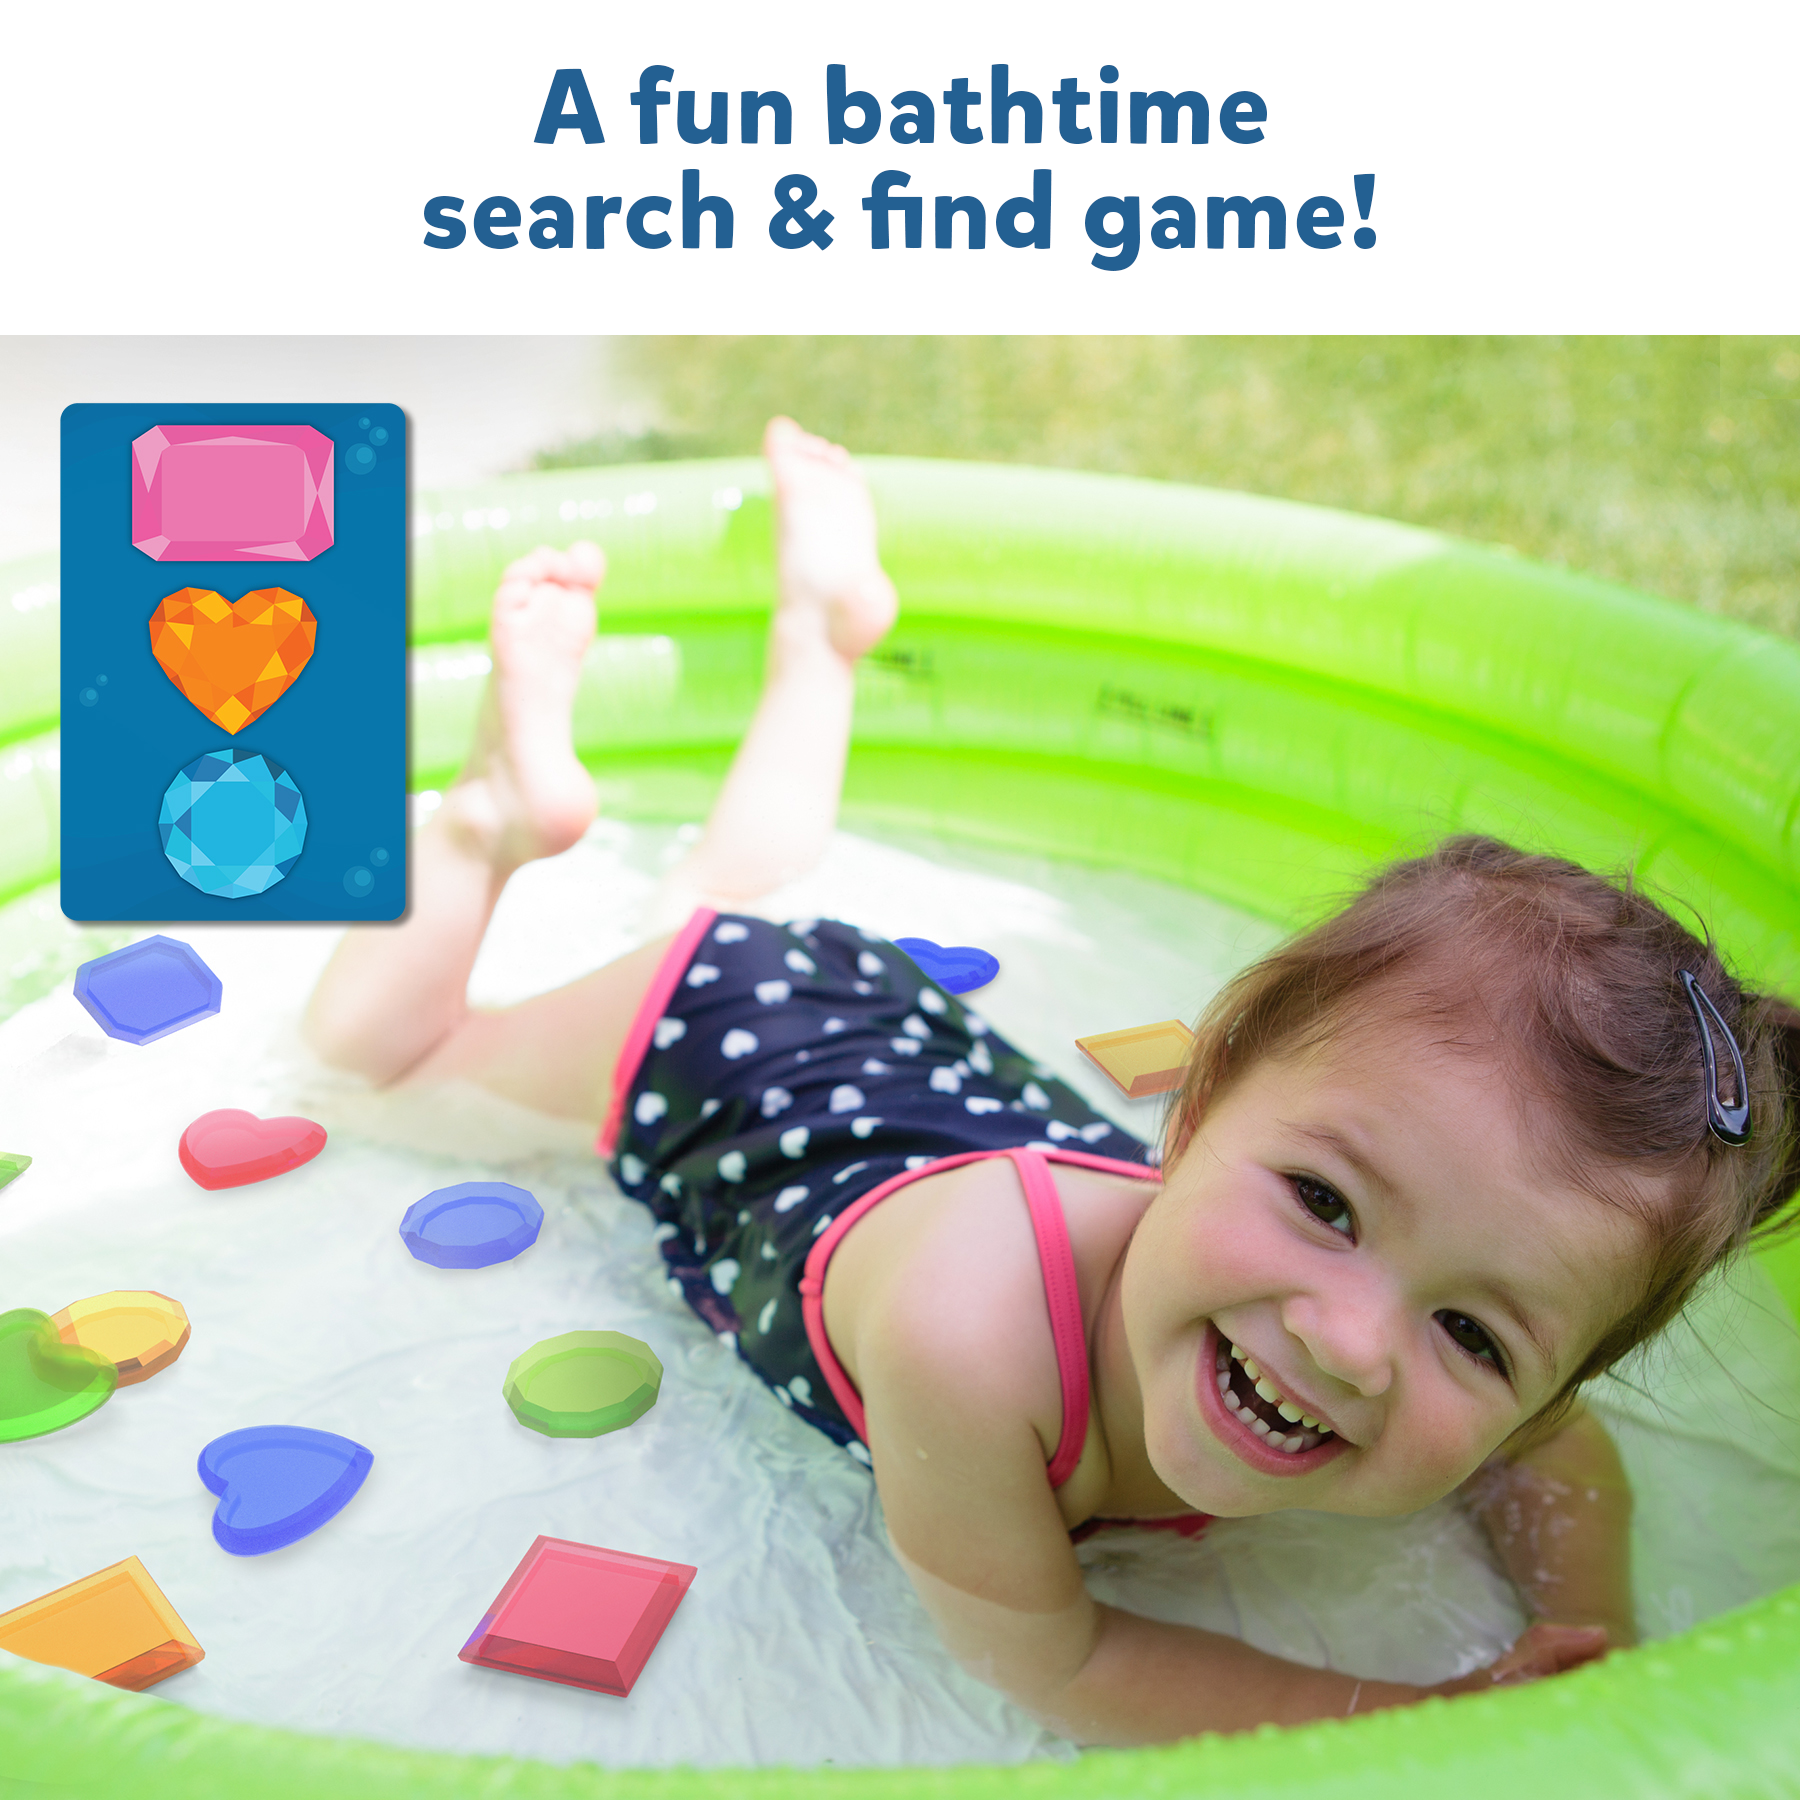 Skillmatics Seek & Splash Bath Toys - Search and Find Gem Game, Bathtub, Baby Pool & Summer Toys for Toddlers, Kids, Preschoolers, Gifts for Boys & Girls Ages 3, 4, 5, 6